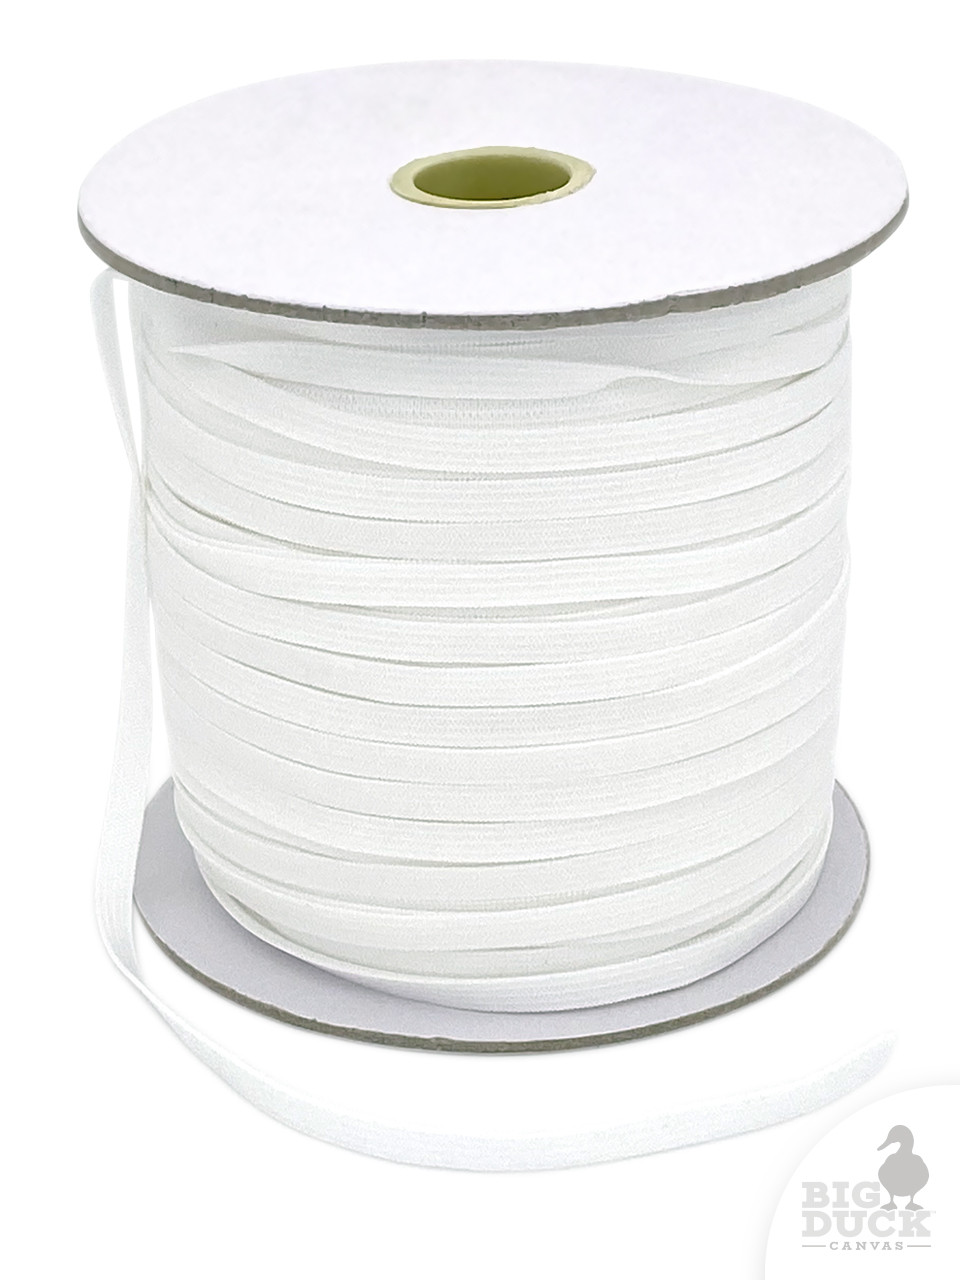 Elastic, 1/4 Knitted White, Wholesale